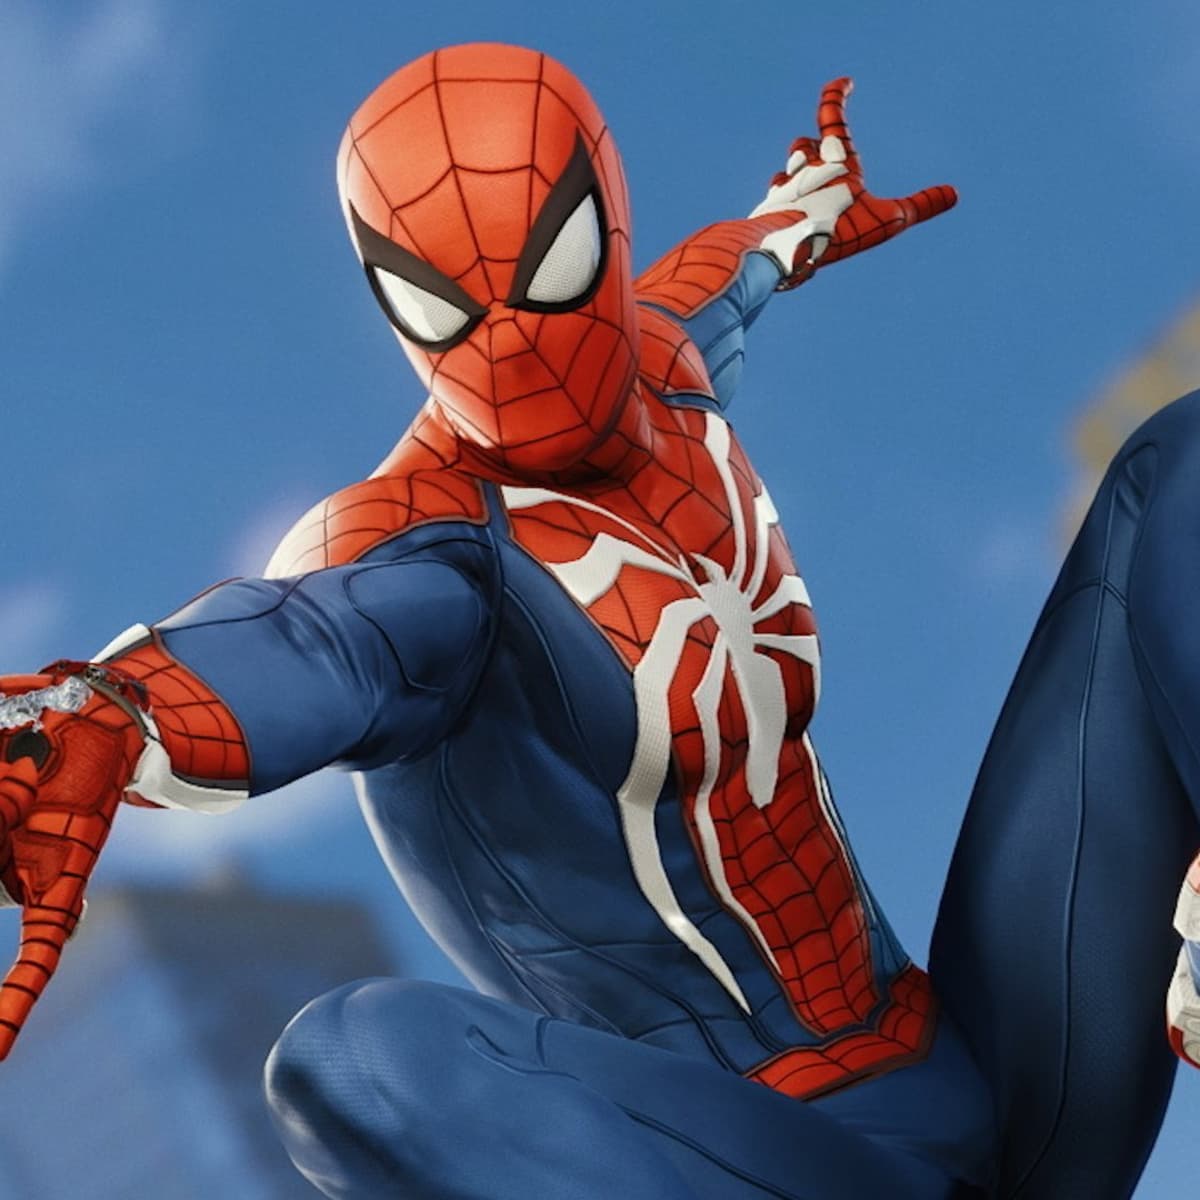 Spider-Man PS4 review